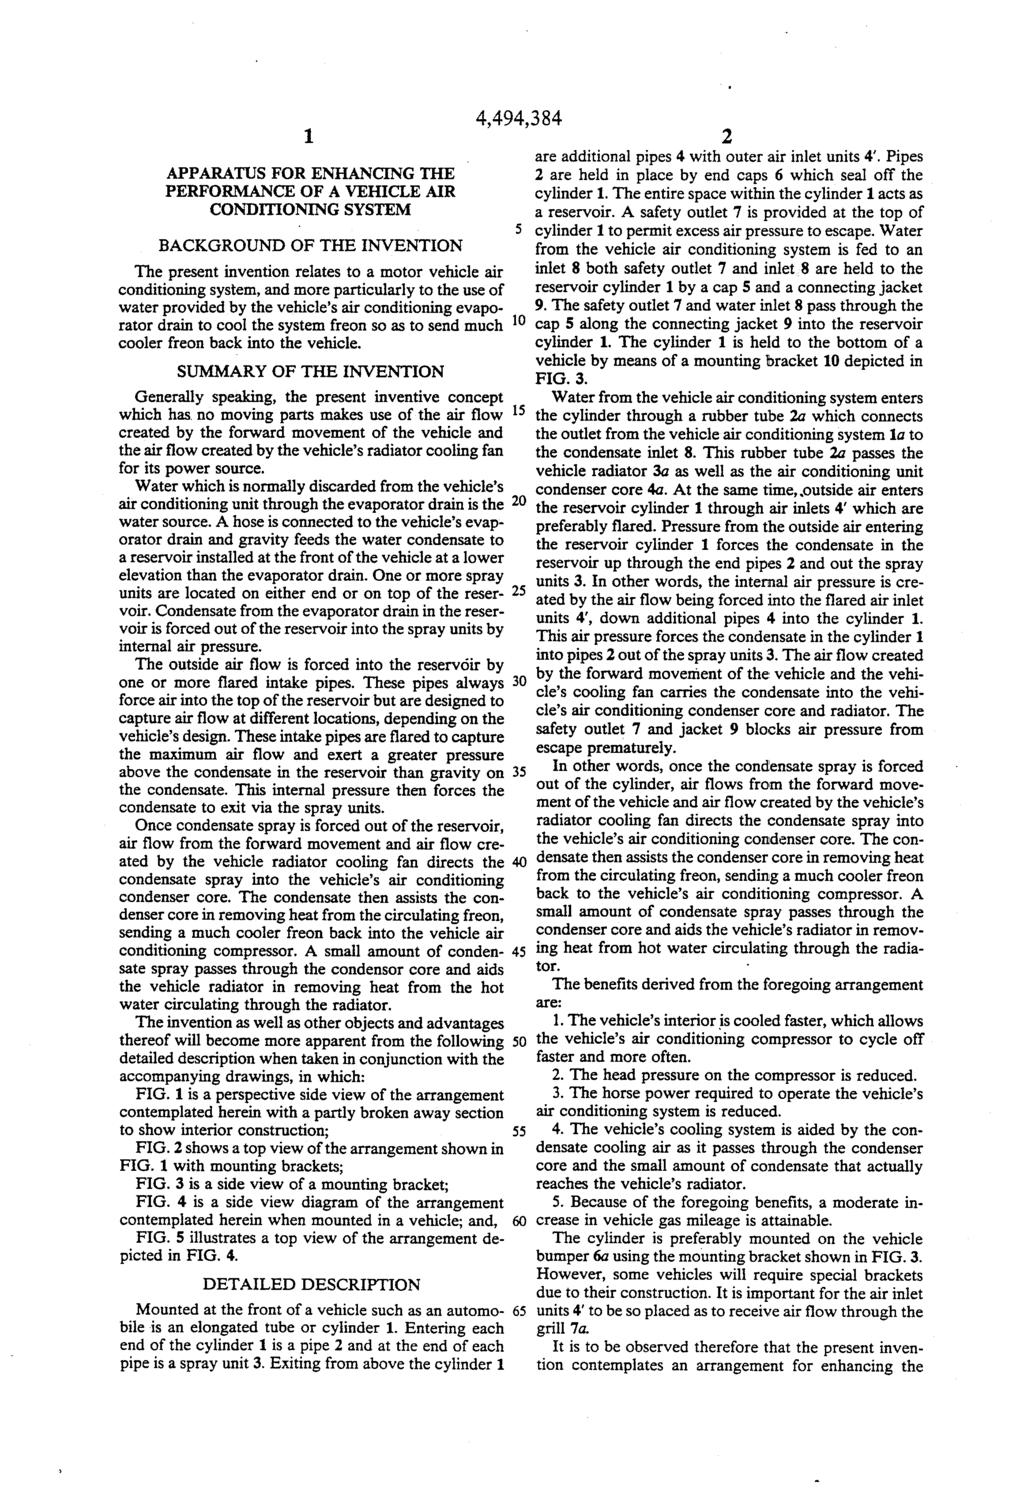 1. APPARATUS FOR ENHANCING THE PERFORMANCE OF A VEHICLE AIR CONDITIONING SYSTEM 4,494,384 BACKGROUND OF THE INVENTION The present invention relates to a motor vehicle air conditioning system, and